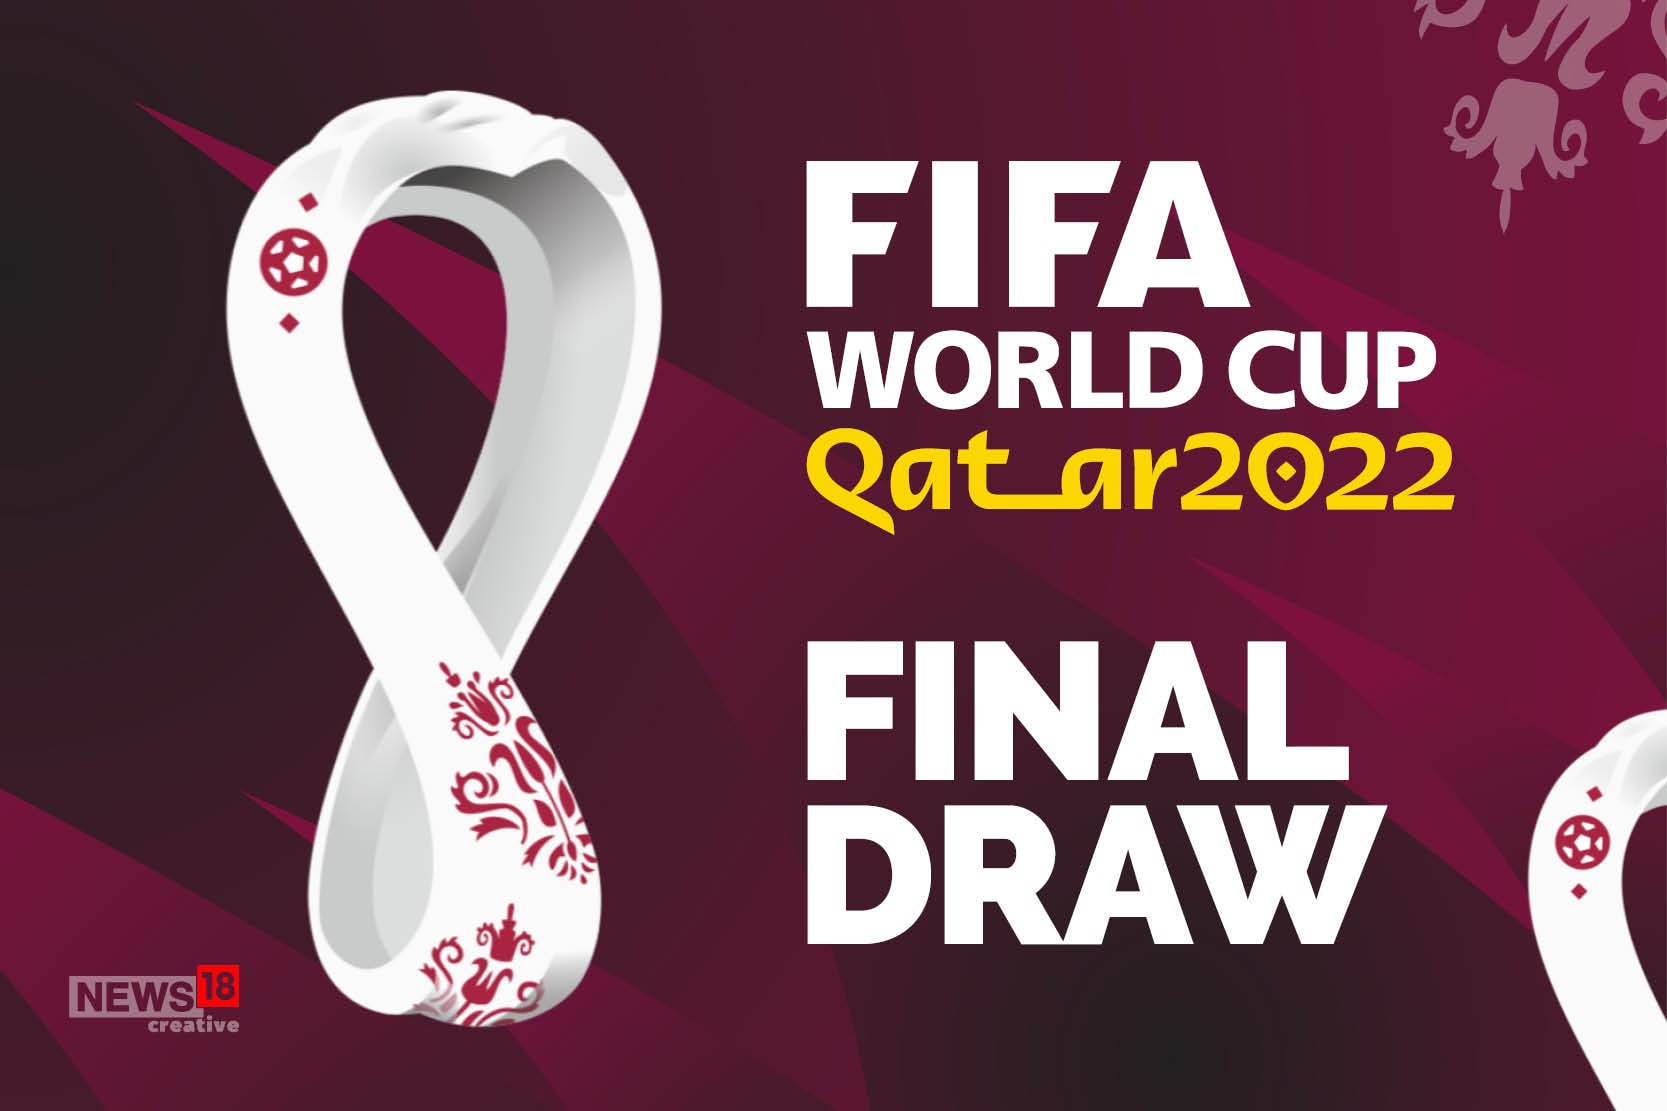 FIFA World Cup Qatar 2022 Final Draw Spain, Germany and Japan in Group E, Brazil Gets Easy IN PICS